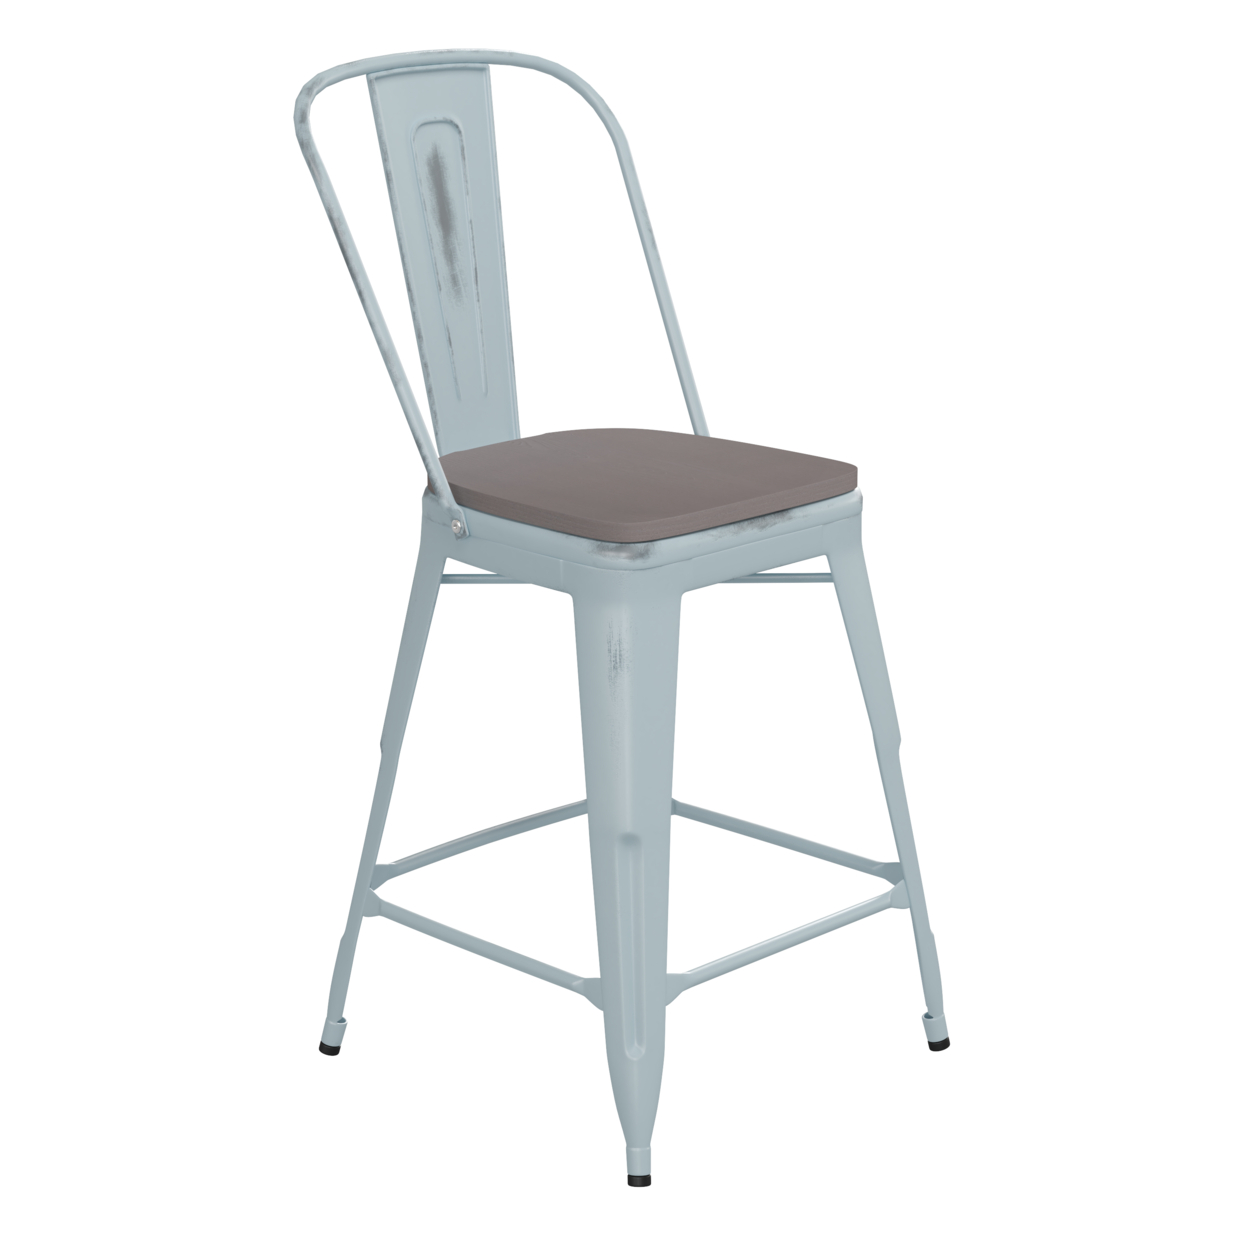 24 Inch Metal Counter Stool, Curved Open Back, Sleek Seat, Light Gray